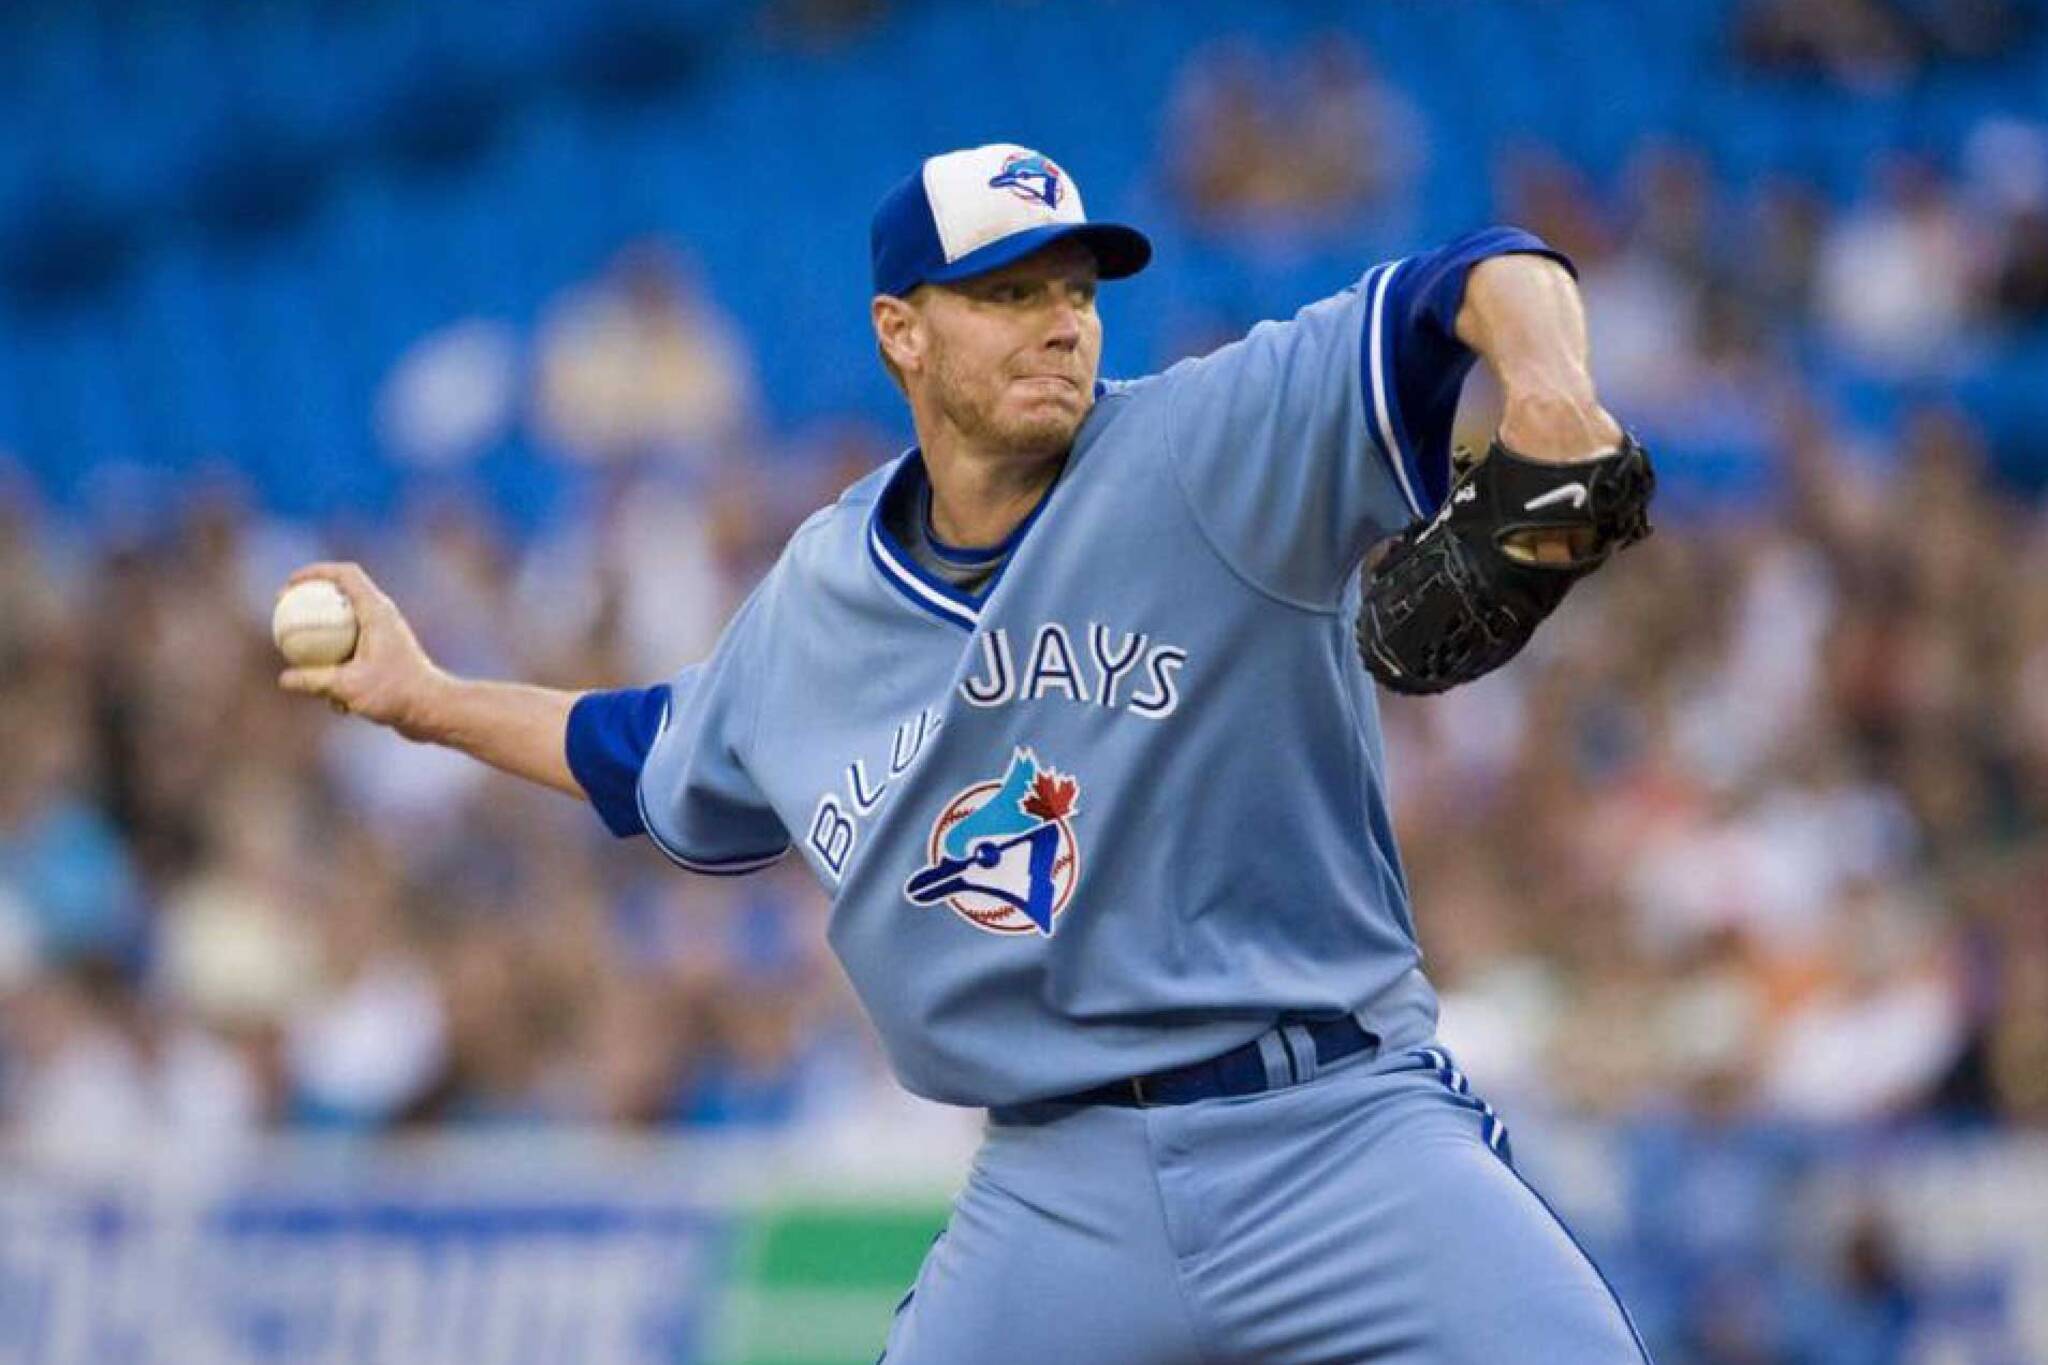 Roy Halladay: Blue Jays honor pitcher with emotional jersey retirement